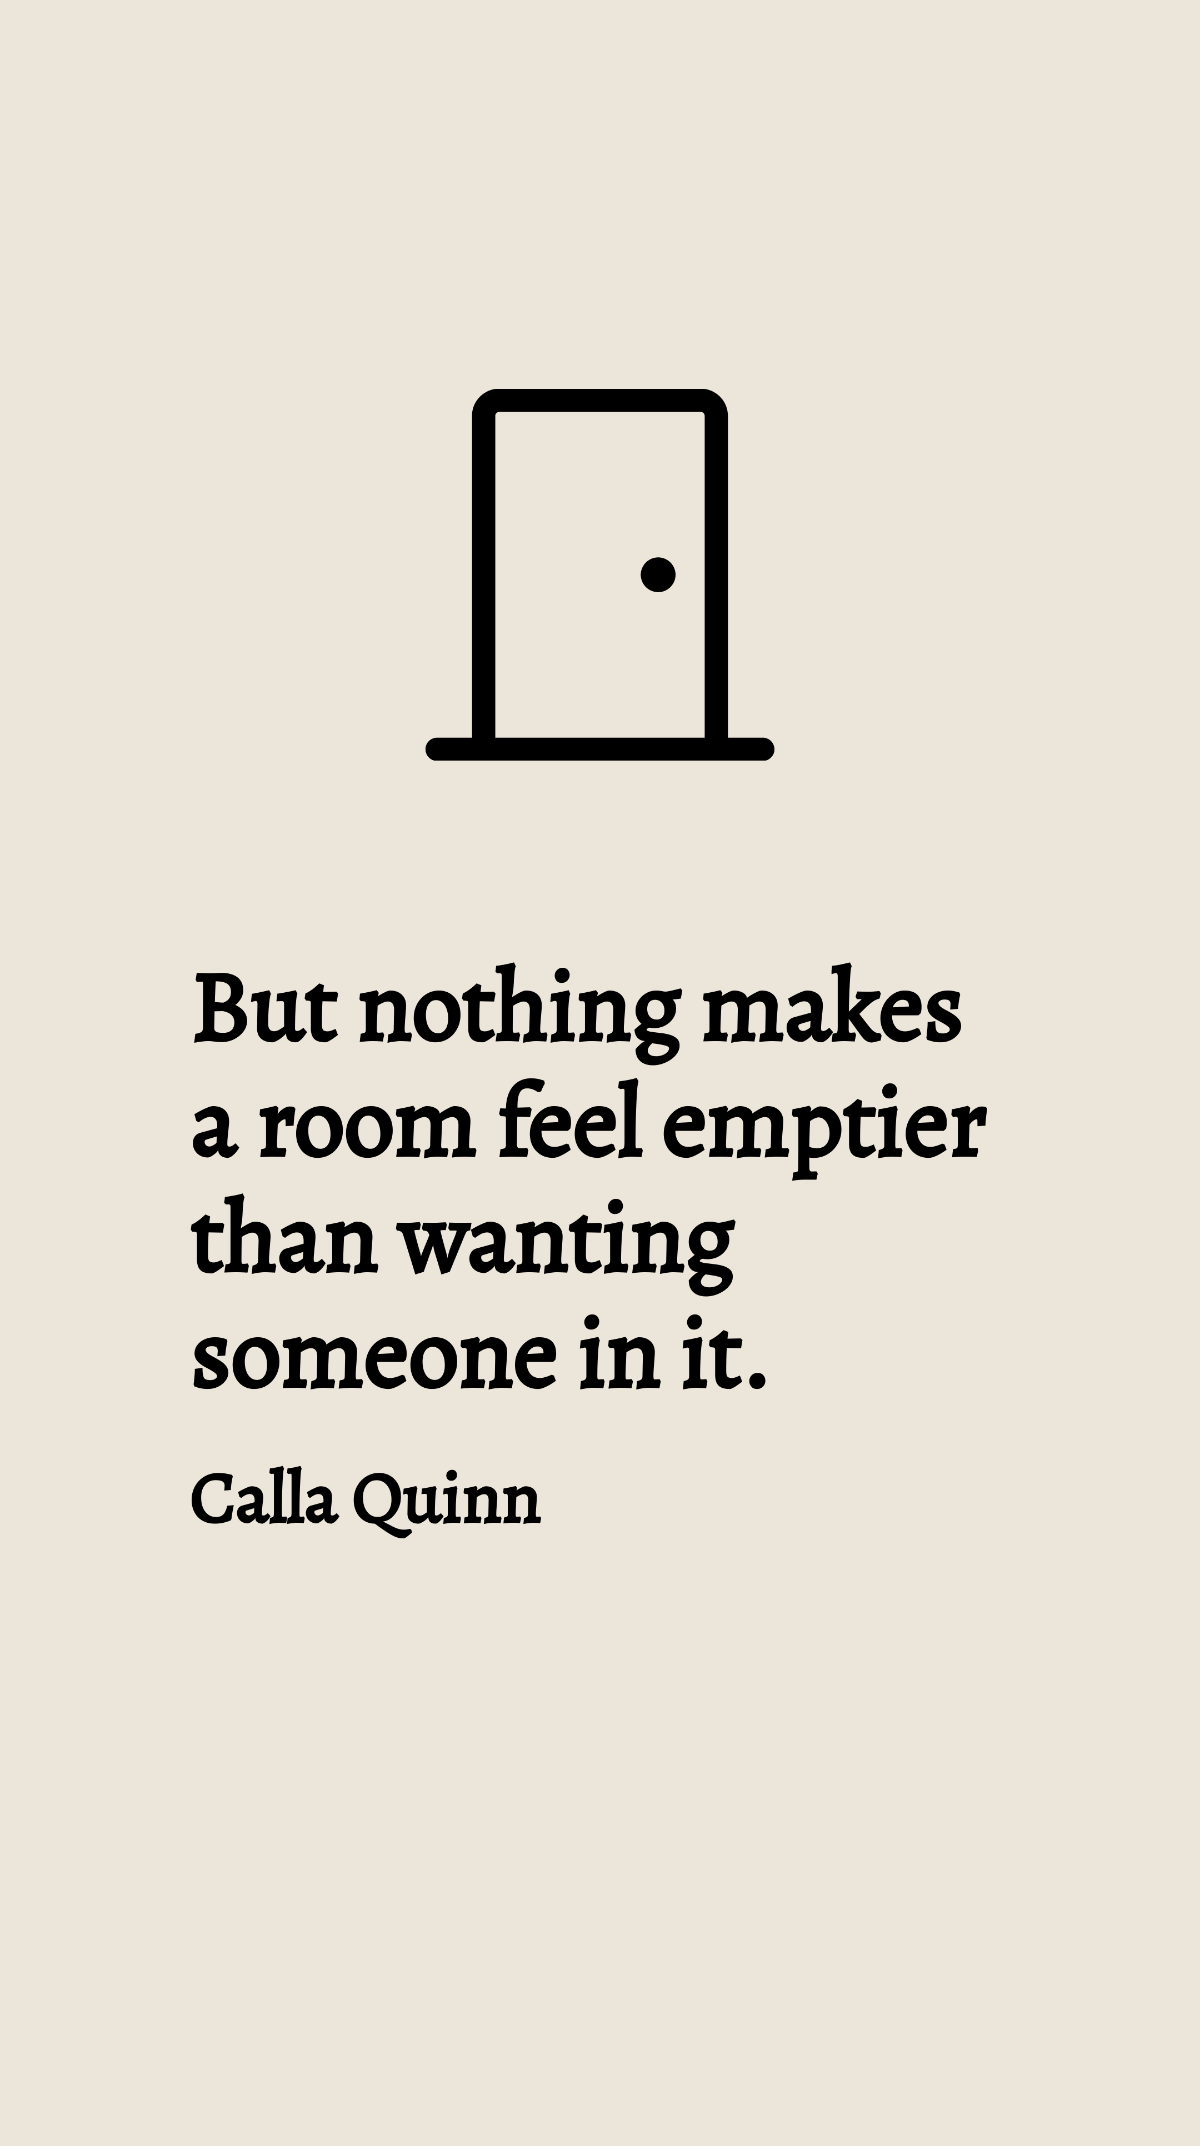 Calla Quinn - But nothing makes a room feel emptier than wanting someone in it. Template